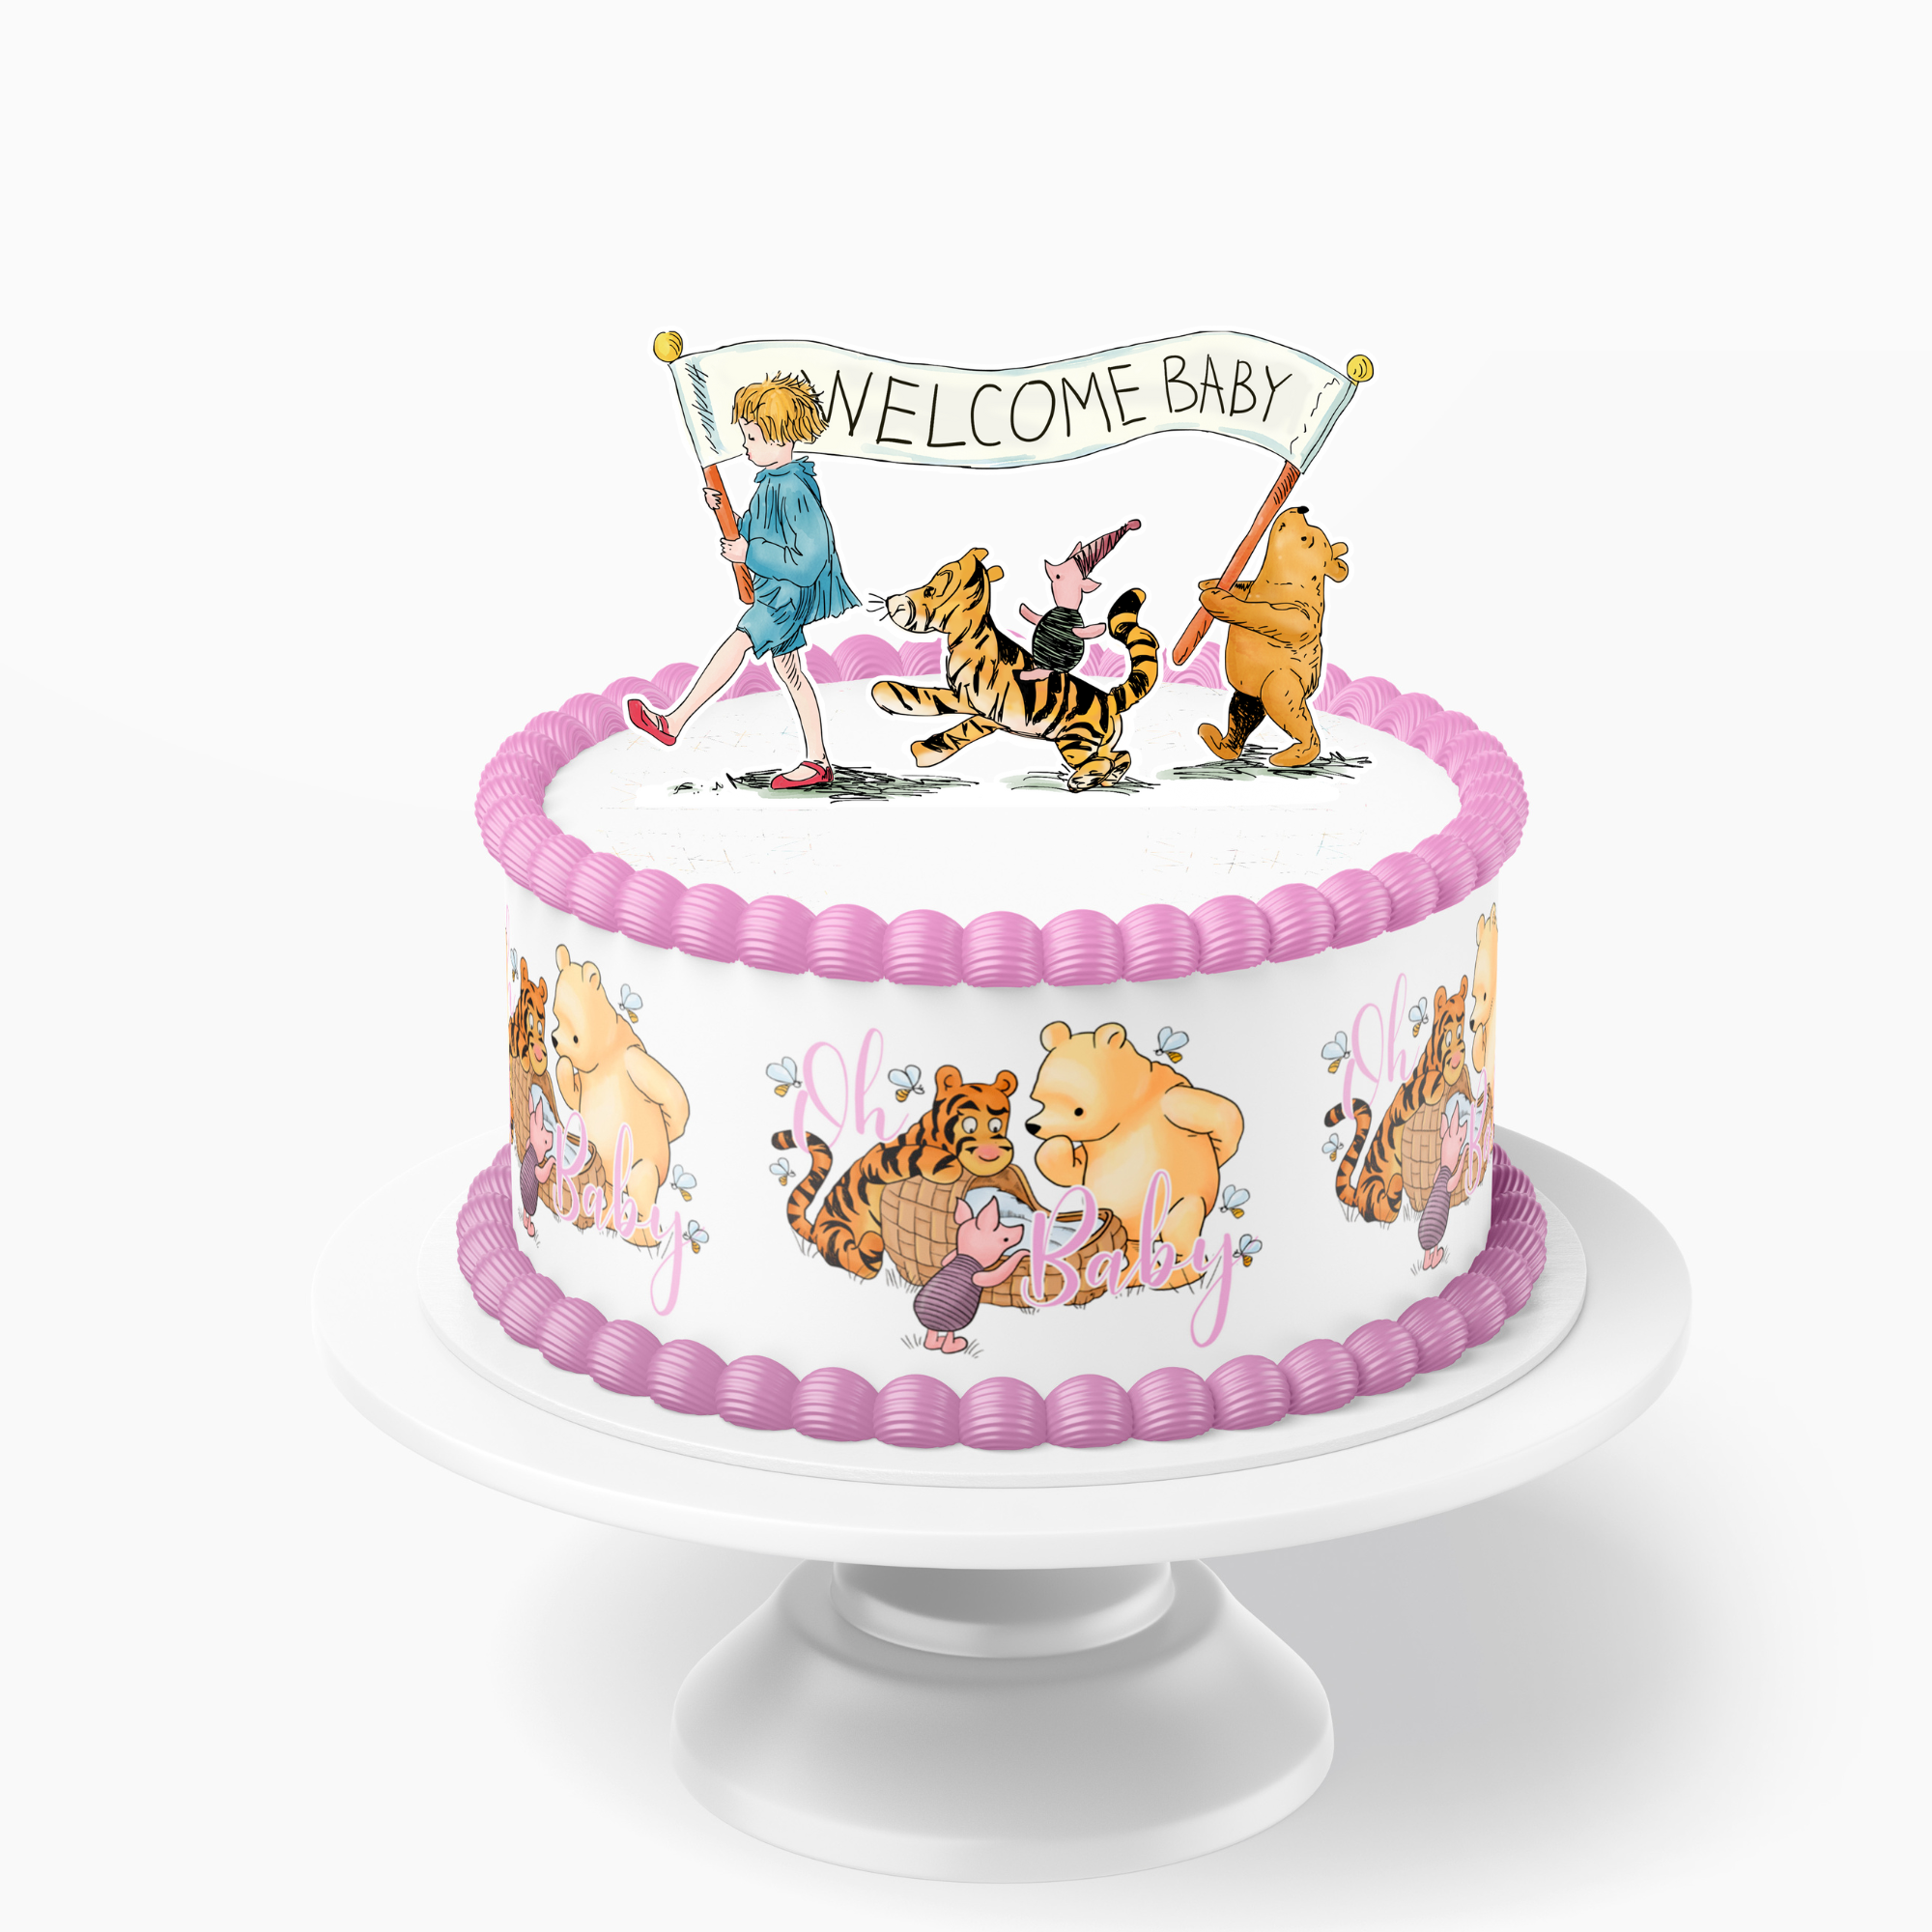 POOH BEAR BABY SHOWER EDIBLE IMAGE CAKE DECORATIONS